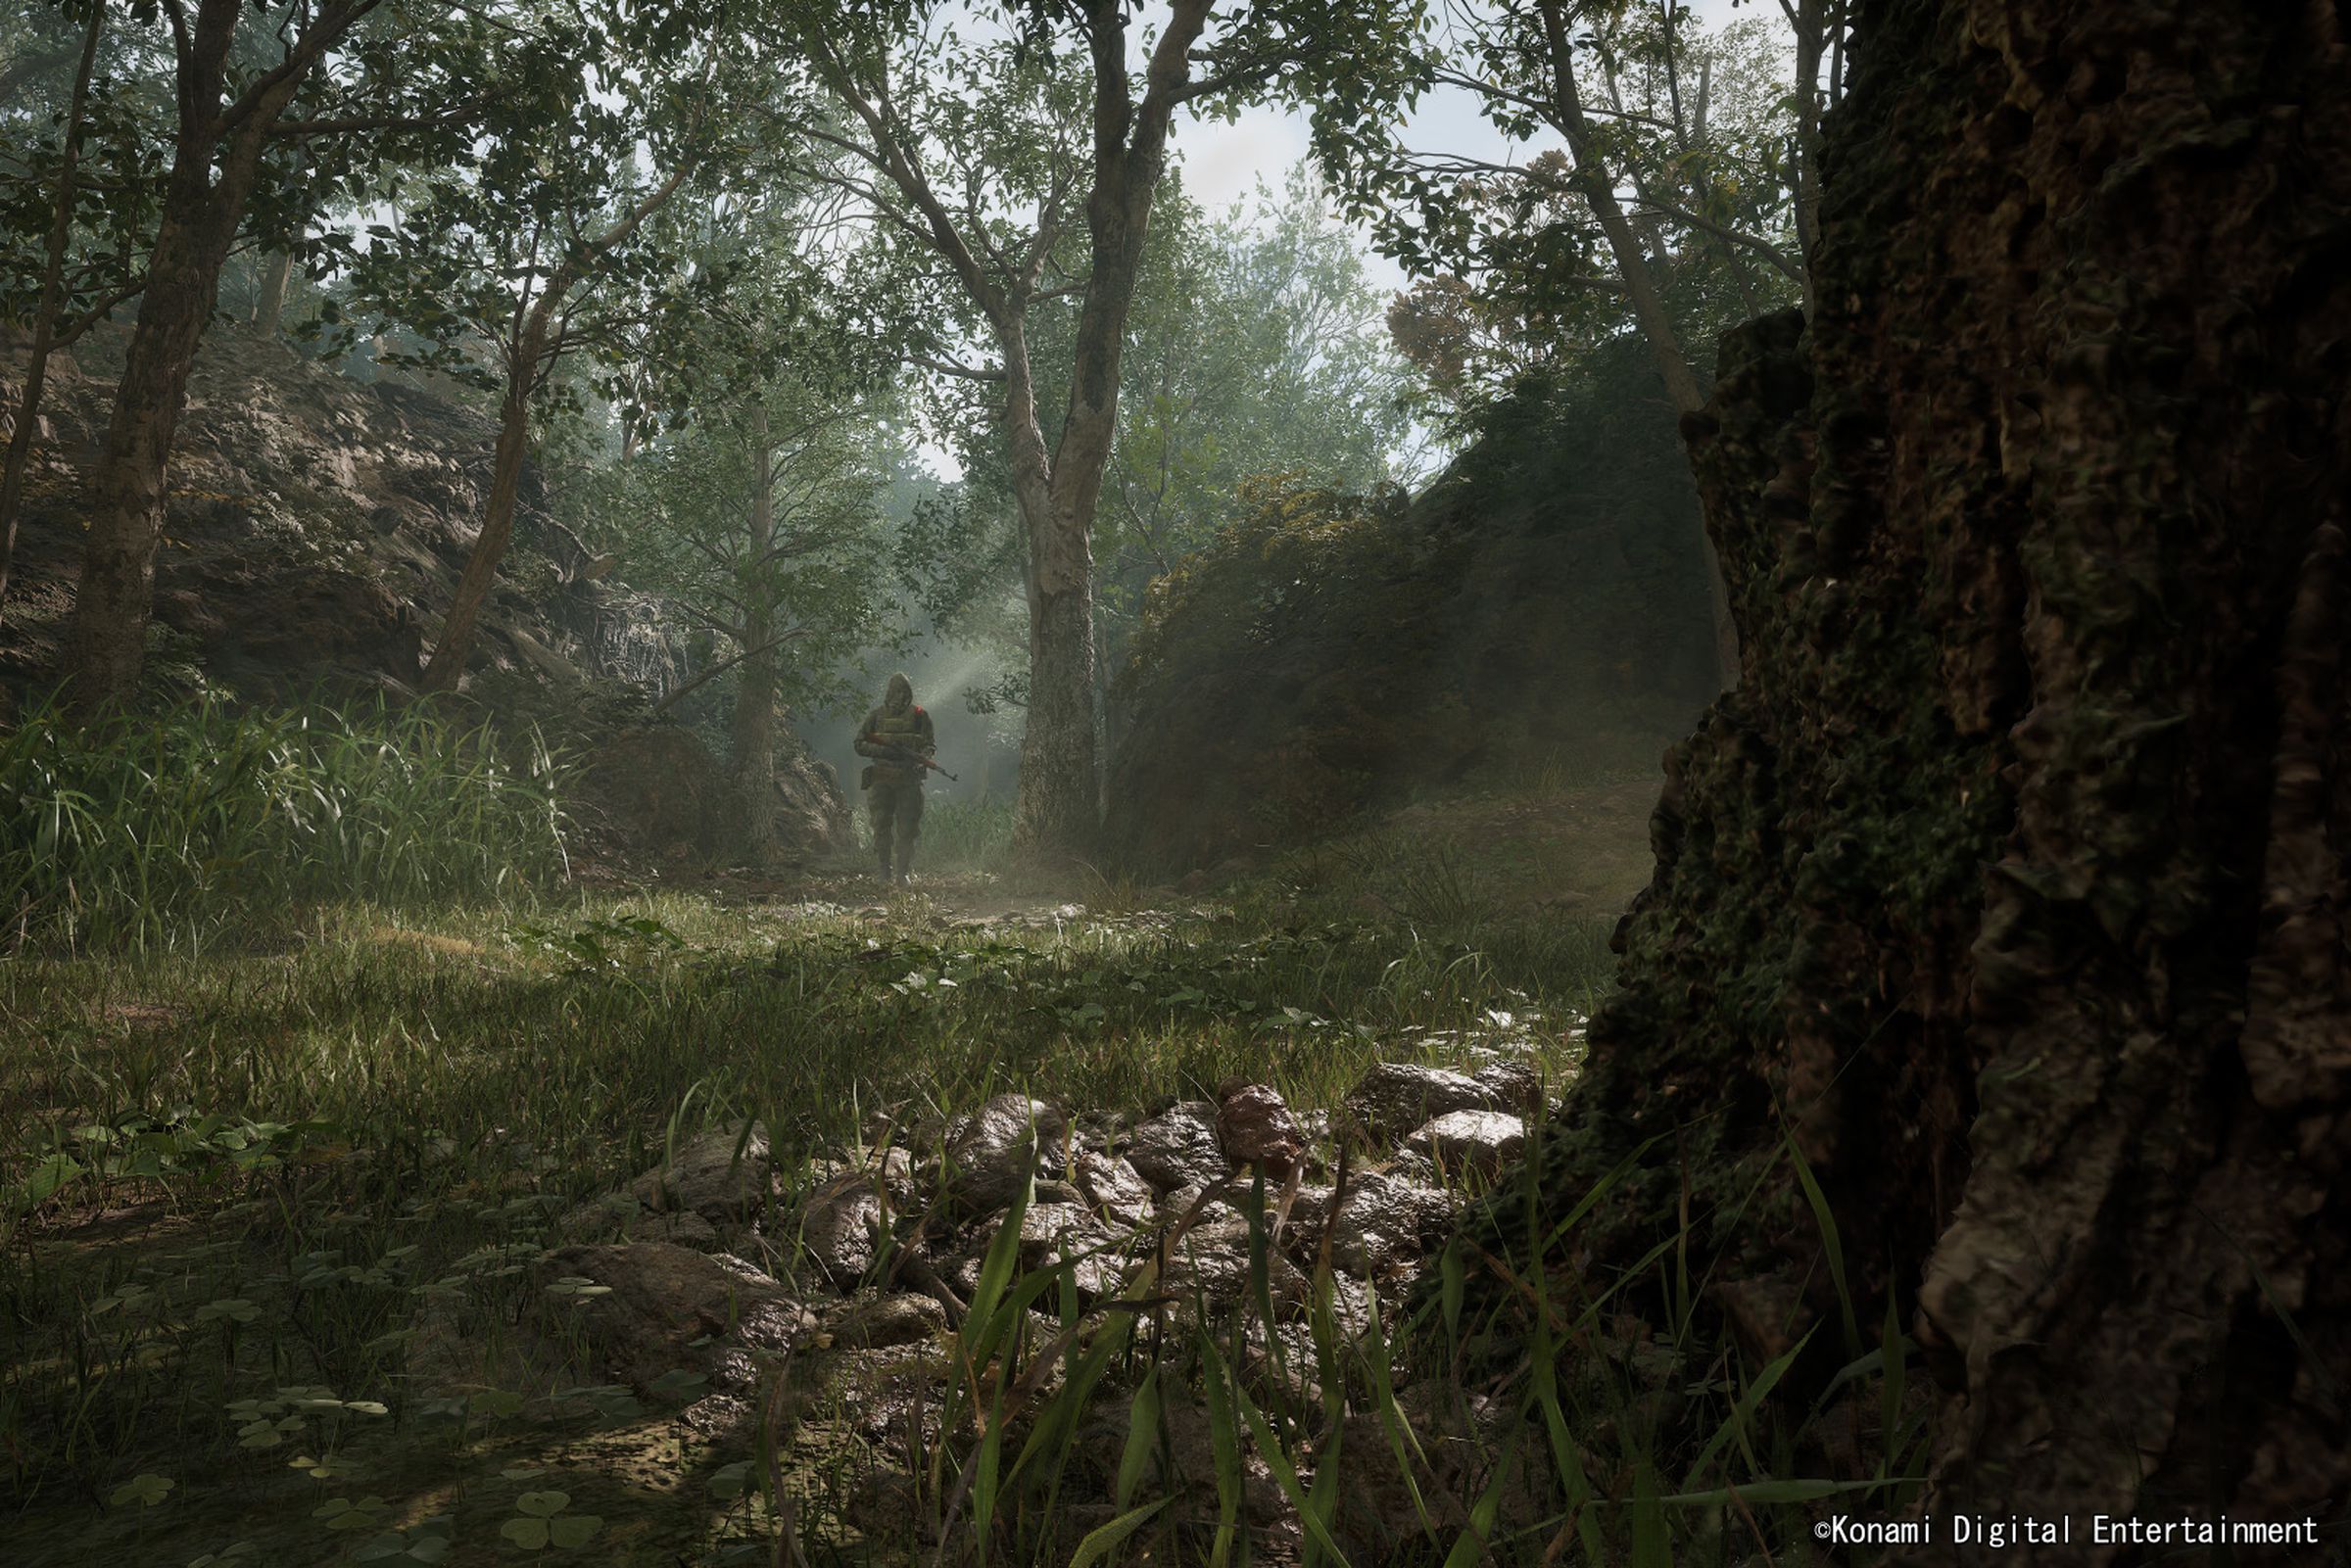 A screenshot from Konami’s MGS3 remake showing a soldier in a forest environment.